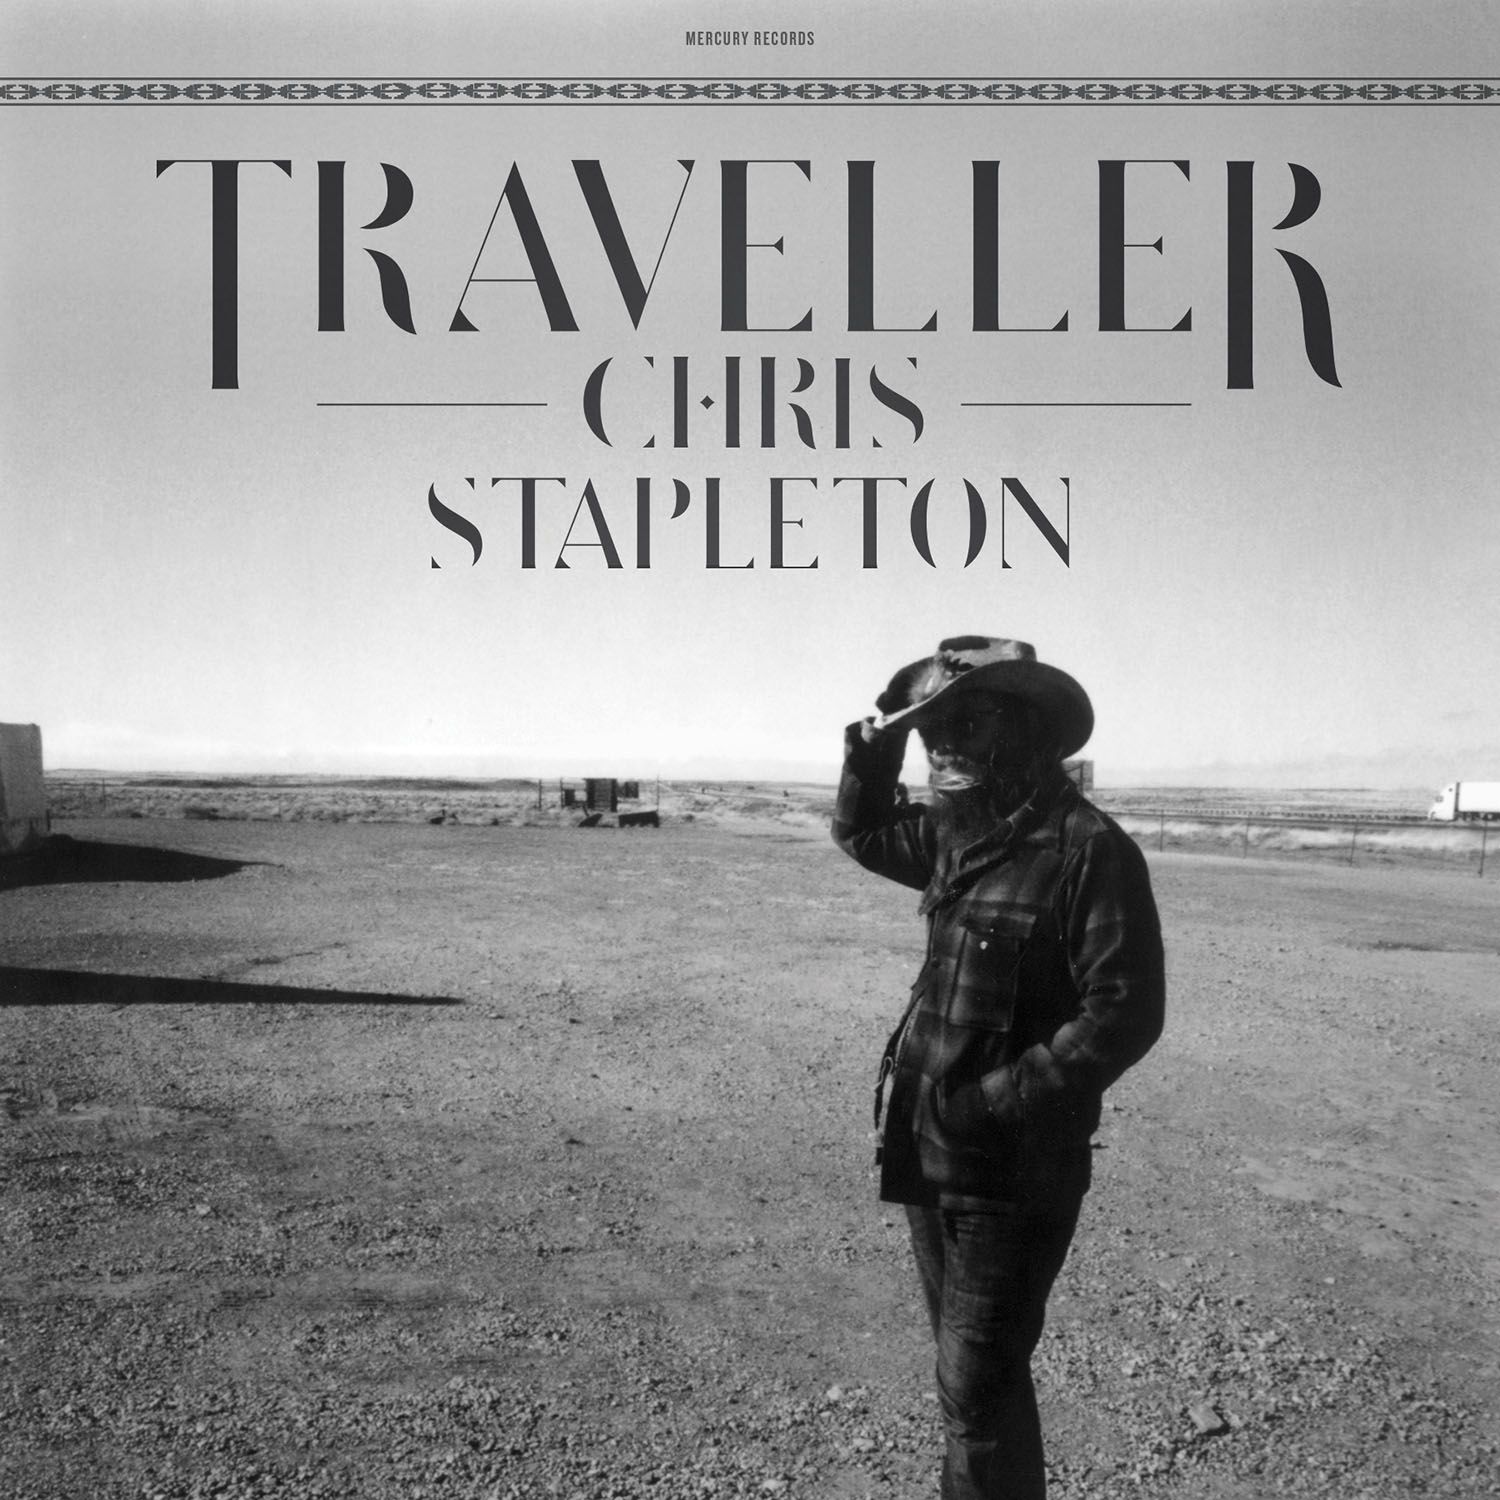 CHRIS STAPLETON’S TRAVELLER LANDS AT NO. 1 ON BILLBOARD 200 AND COUNTRY ALBUM CHARTS